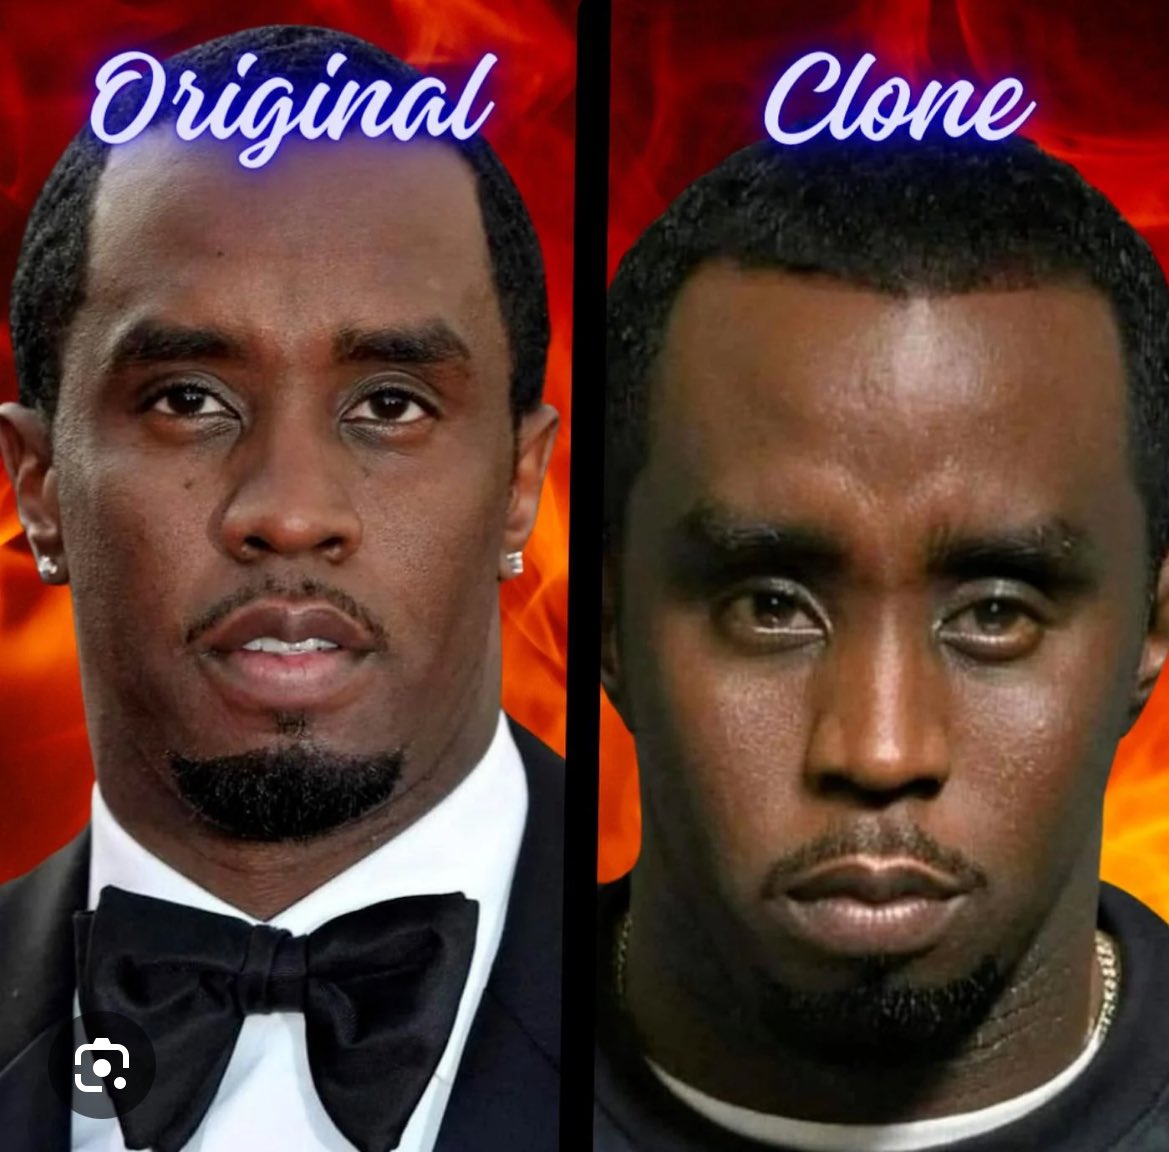 Do you think Diddy has a clone….? 

I imagine Epstein did….. 

#WeWantAnswers